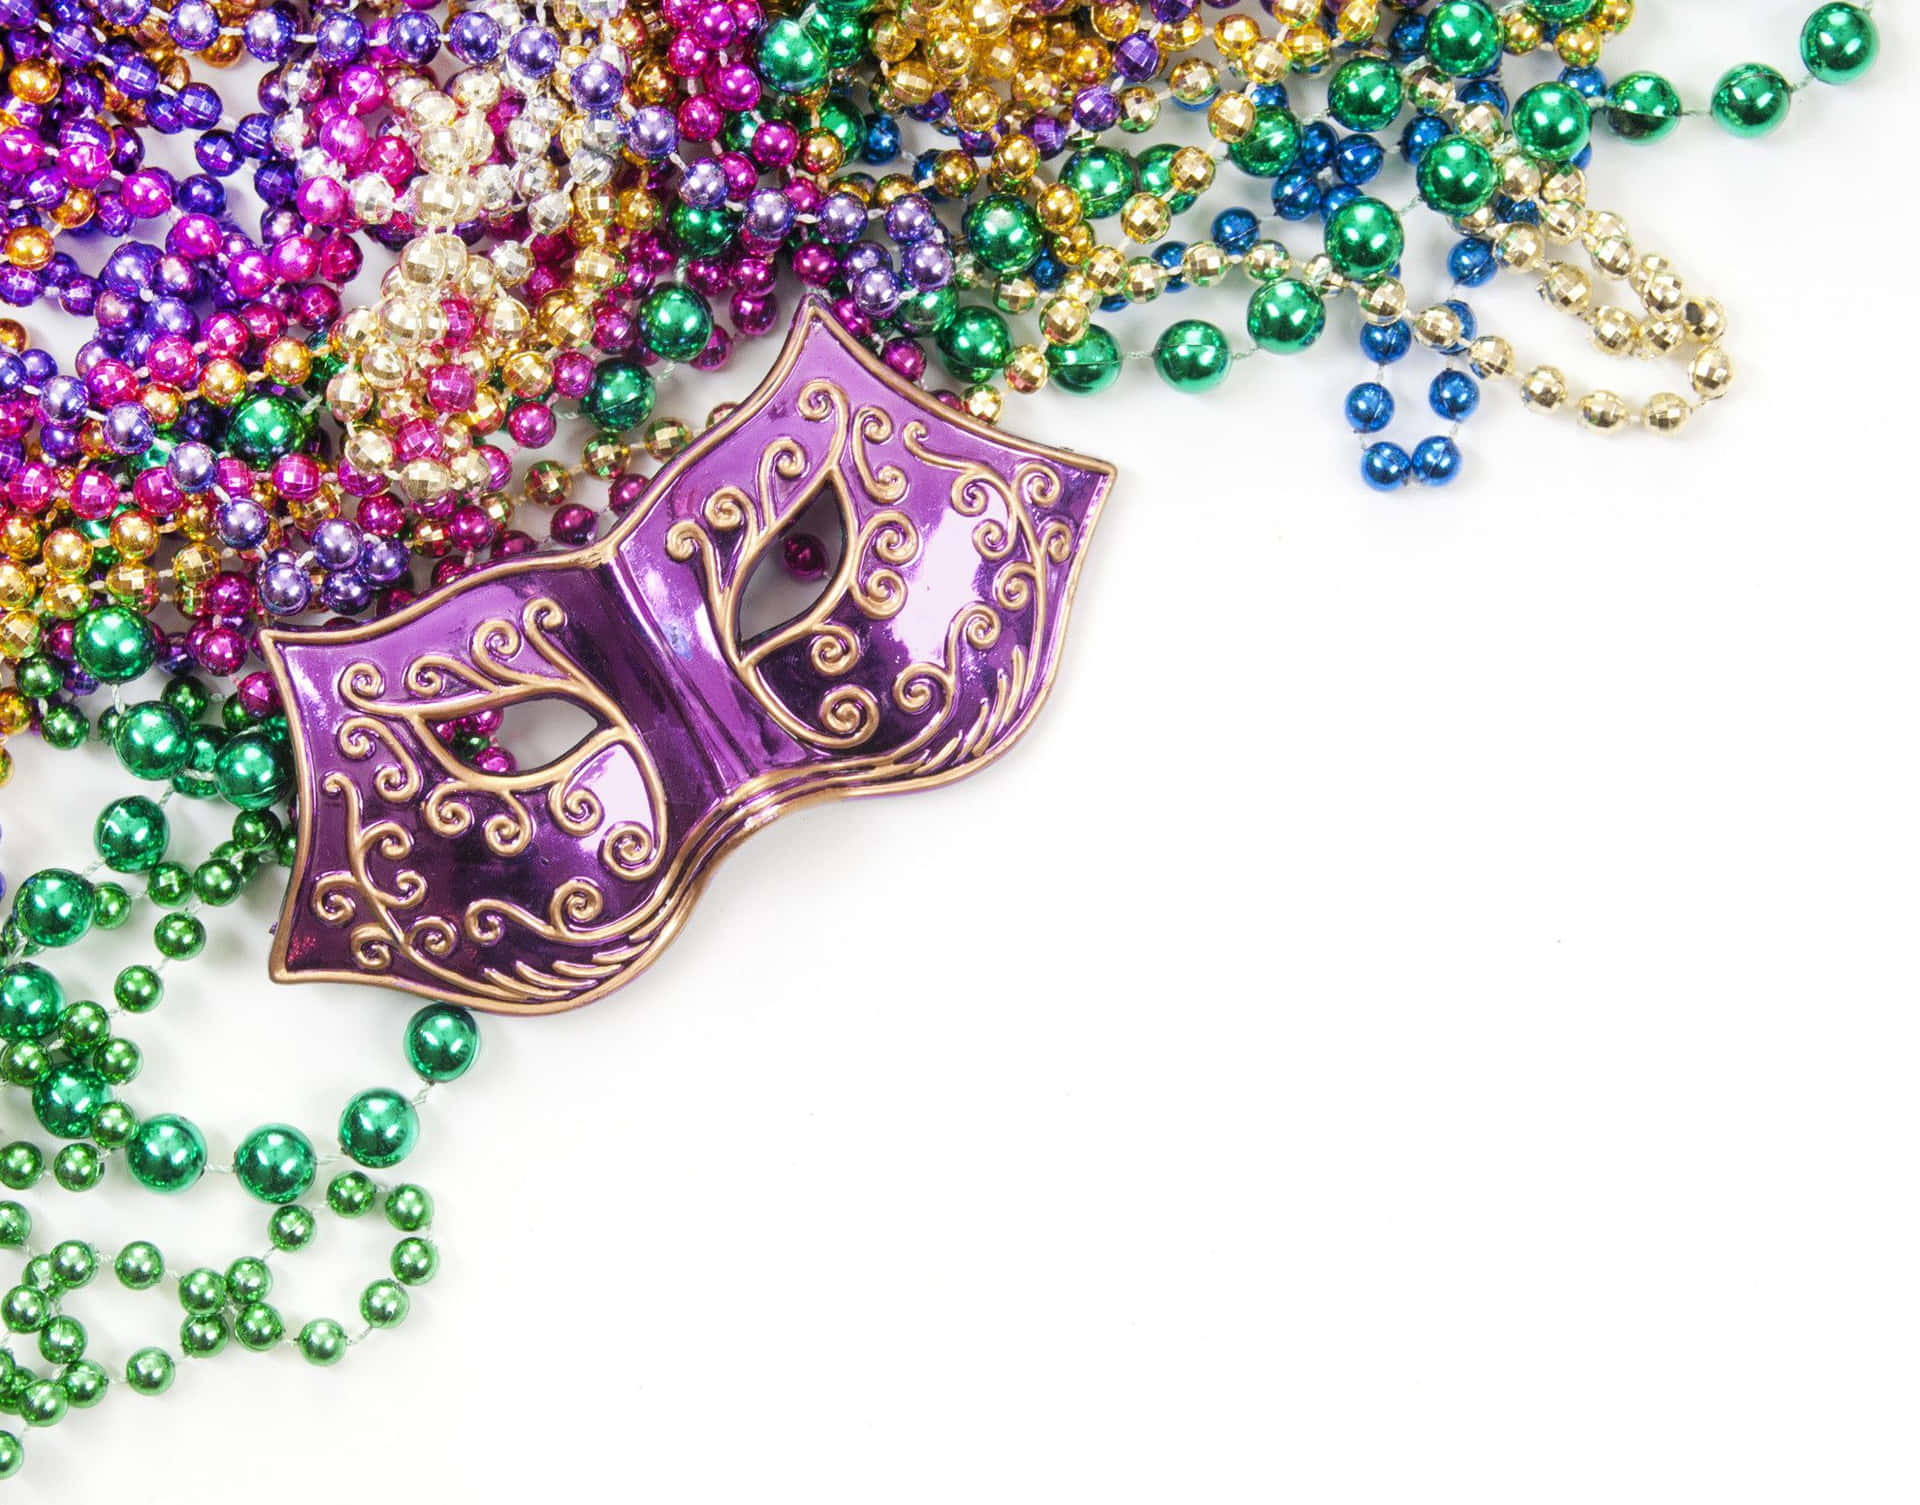 Mardi Gras Mask With Colorful Beads Jewelry Background